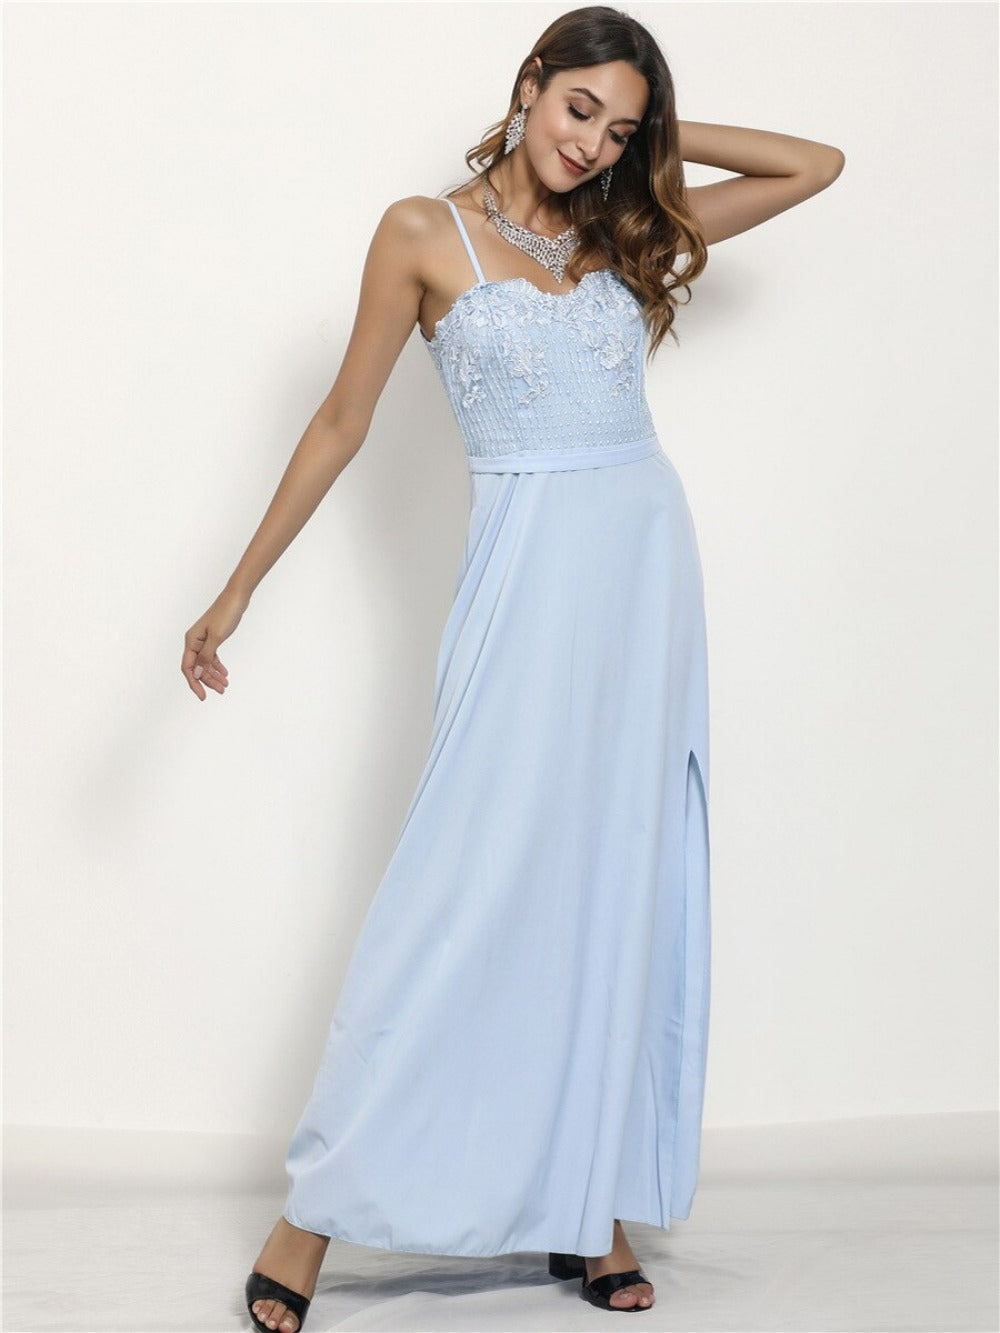 Everyday.Discount buy women prom galadress gowns formal tiktok videos bridal women nigthout gowns dresses pinterest ankle lenght sleeveless straps dresses facebookwomen straps floorlenght weddings lace bust insert dresses fashiondress women's formal dresses coctaildress parties dresses everyday free.shipping